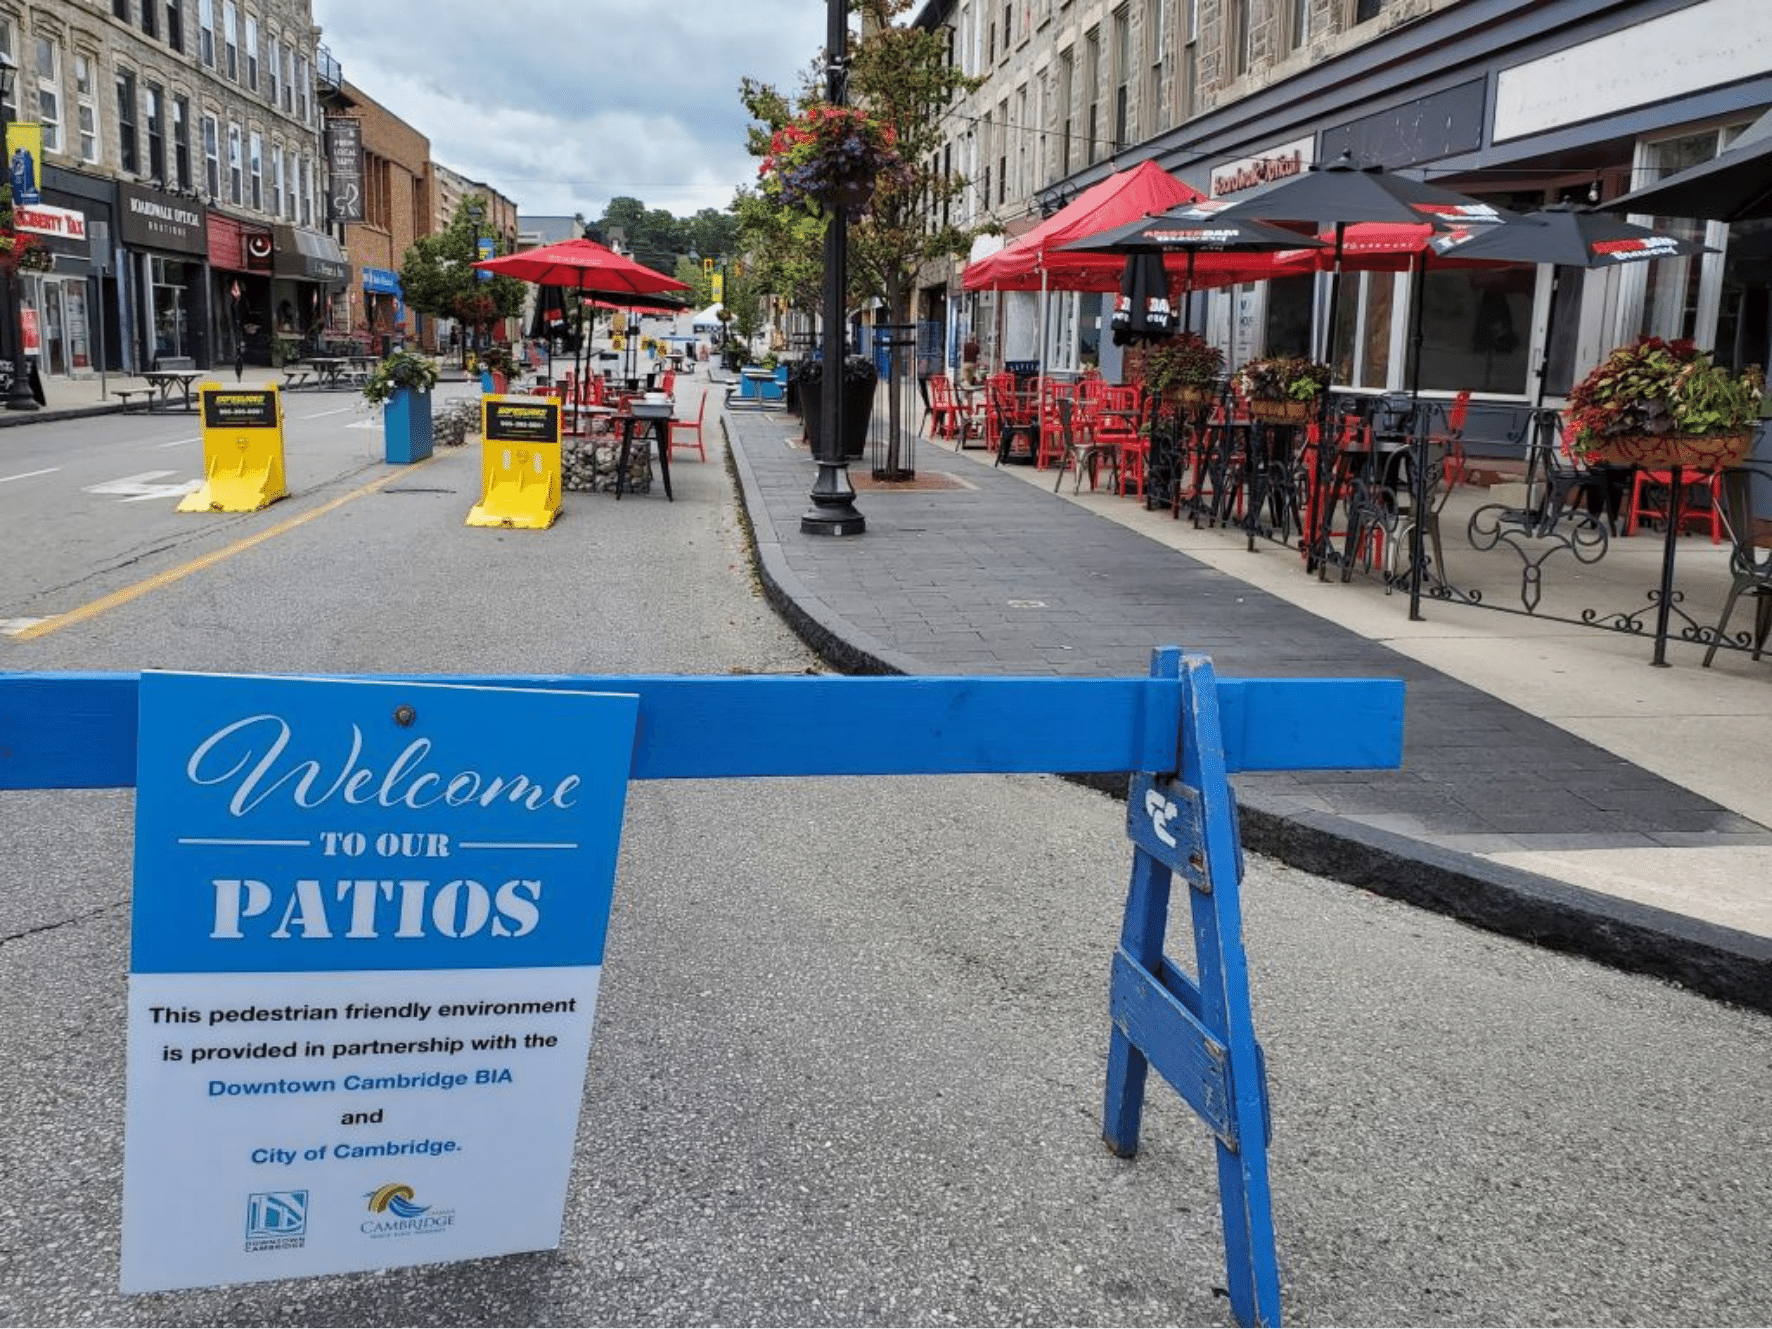 Photo of a street closed to motor vehicle traffic using blue barricades with restaurant patios and red umbrellas on the street and sidewalk